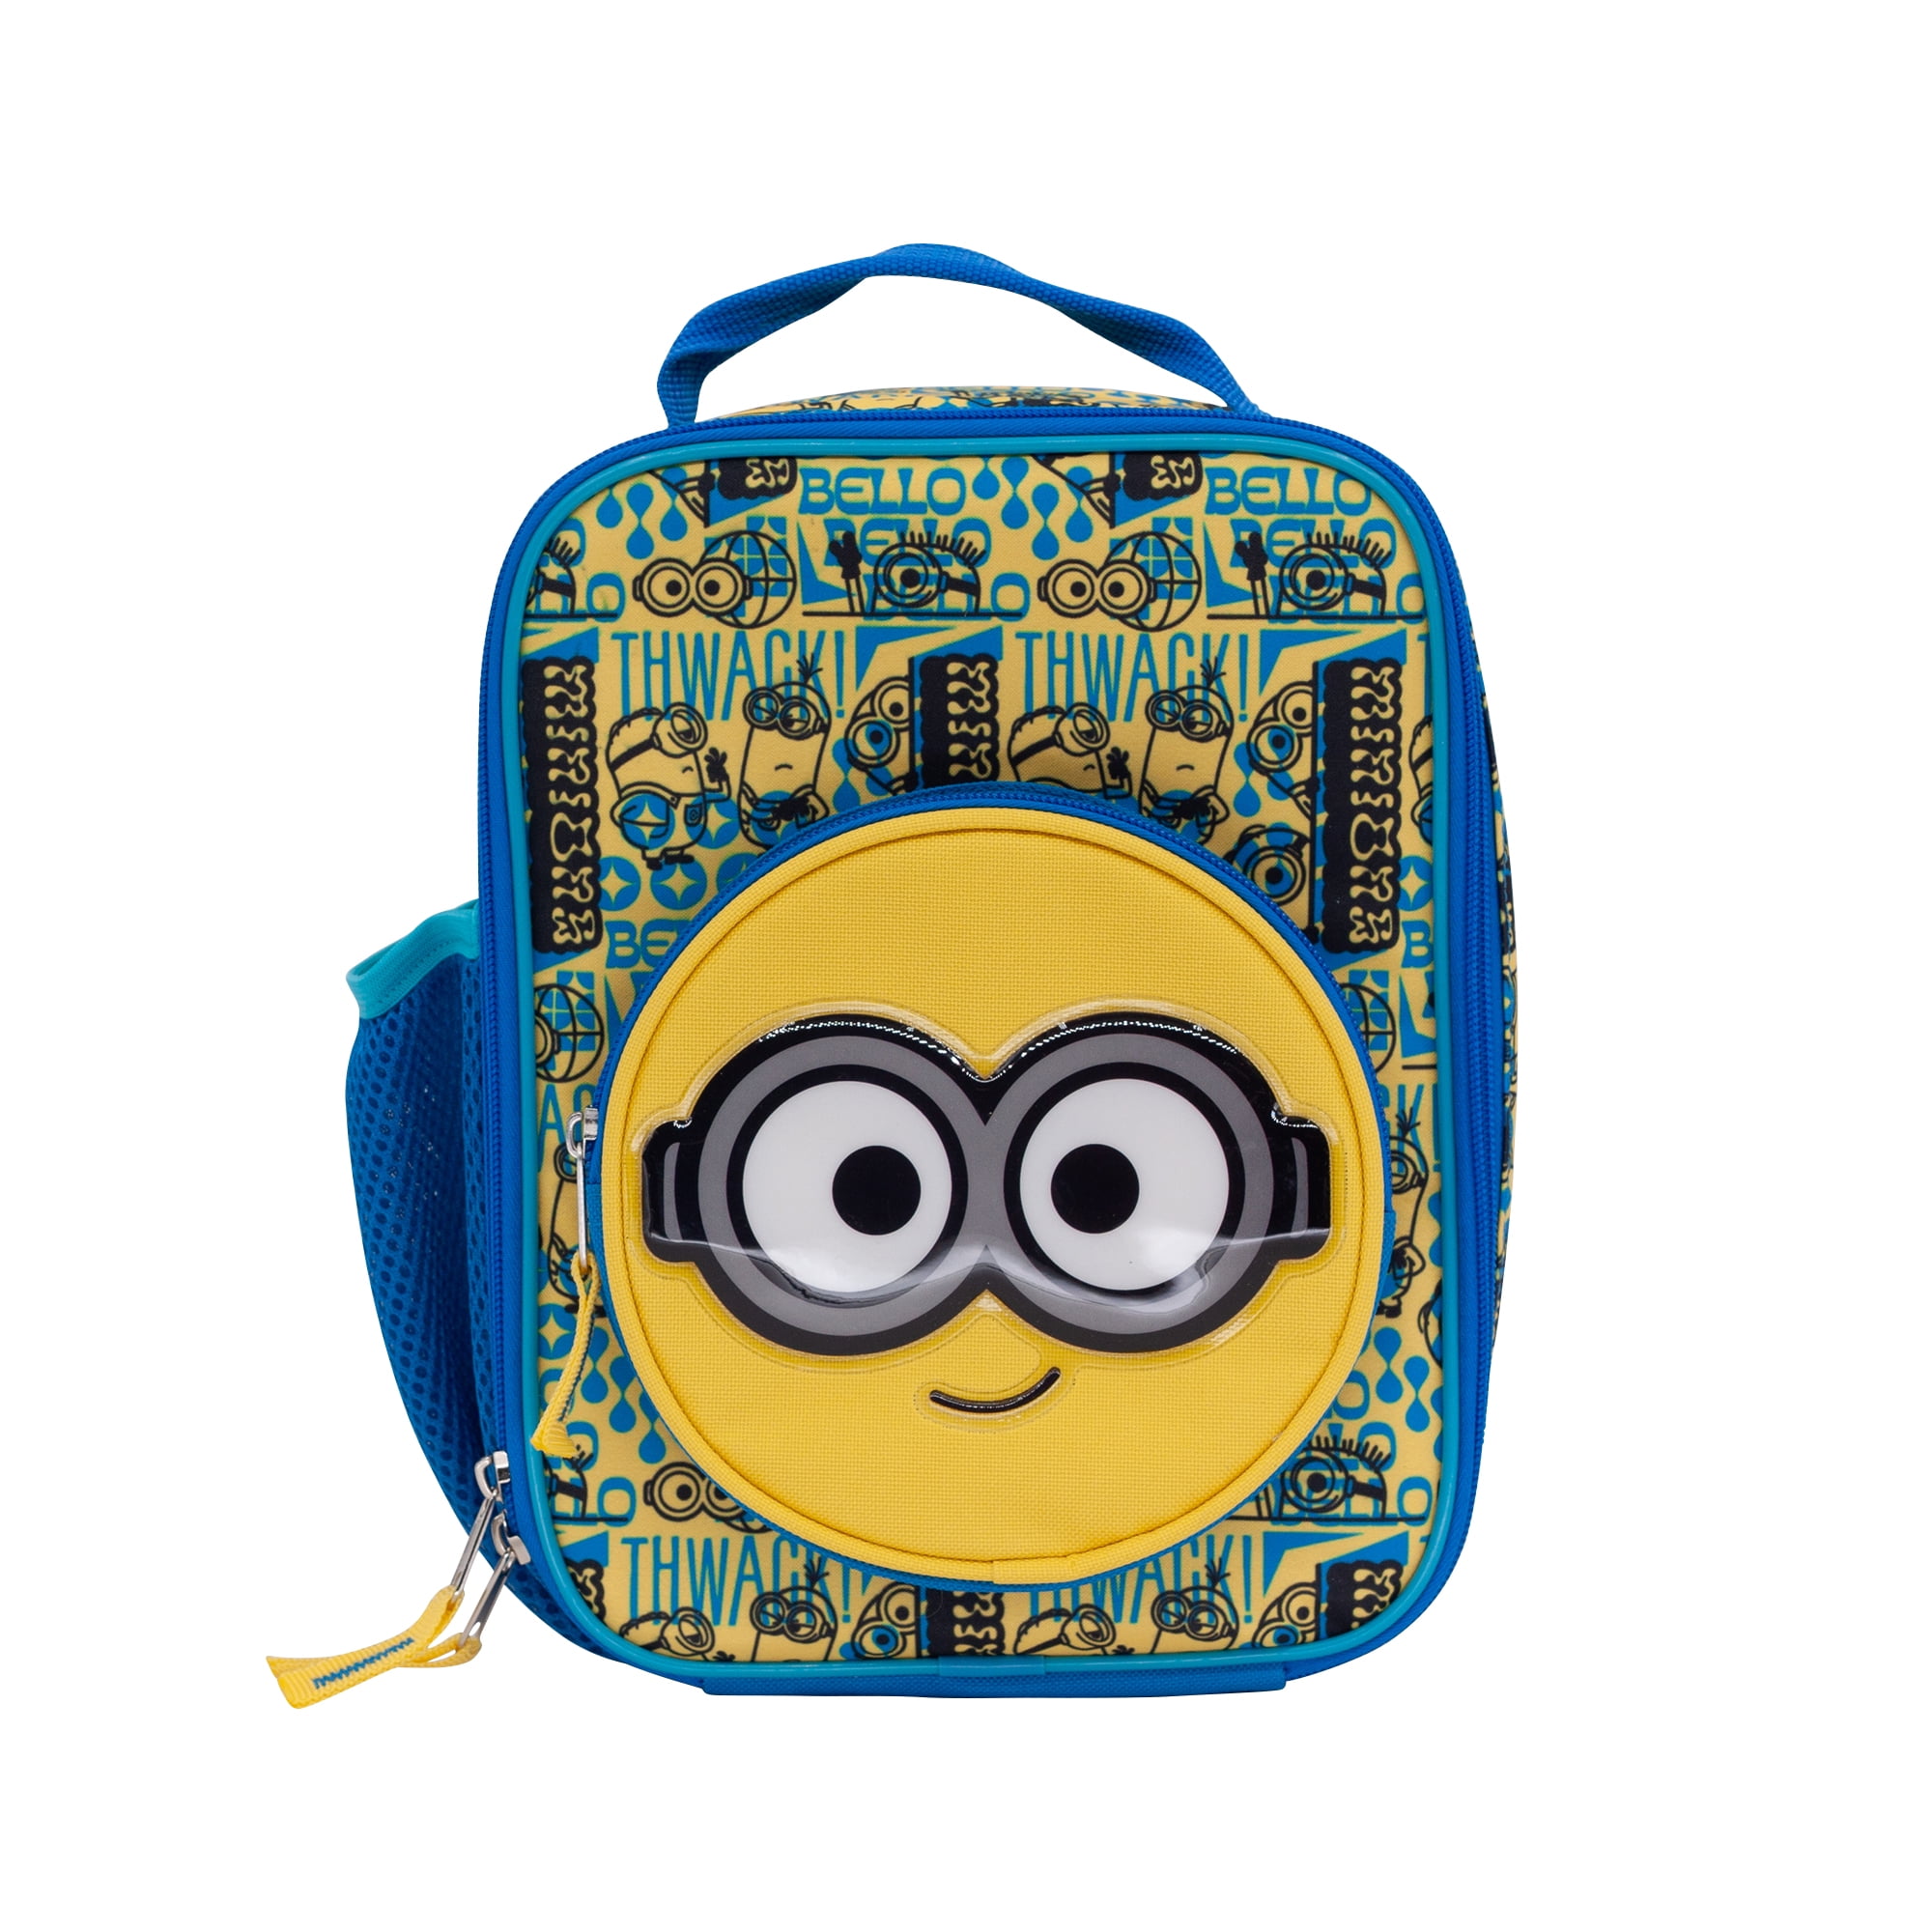 Despicable Me Minions Authentic Licensed Black Lunch bag with Statione